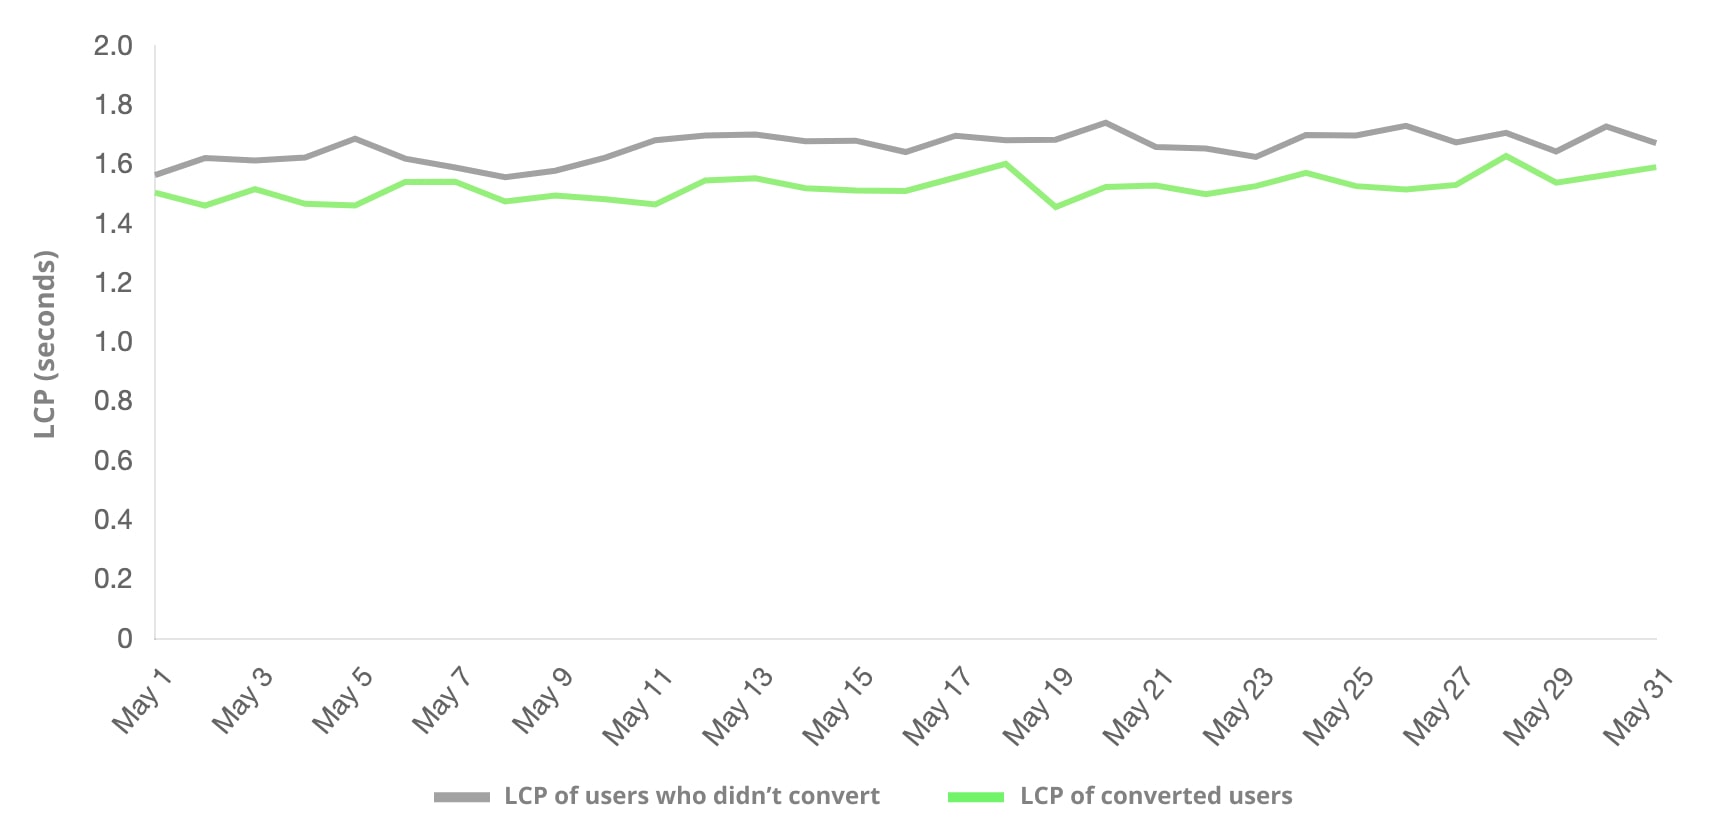 A comparison of users who converted versus those who didn't by LCP. The user group who converted more frequently experienced a lower LCP.